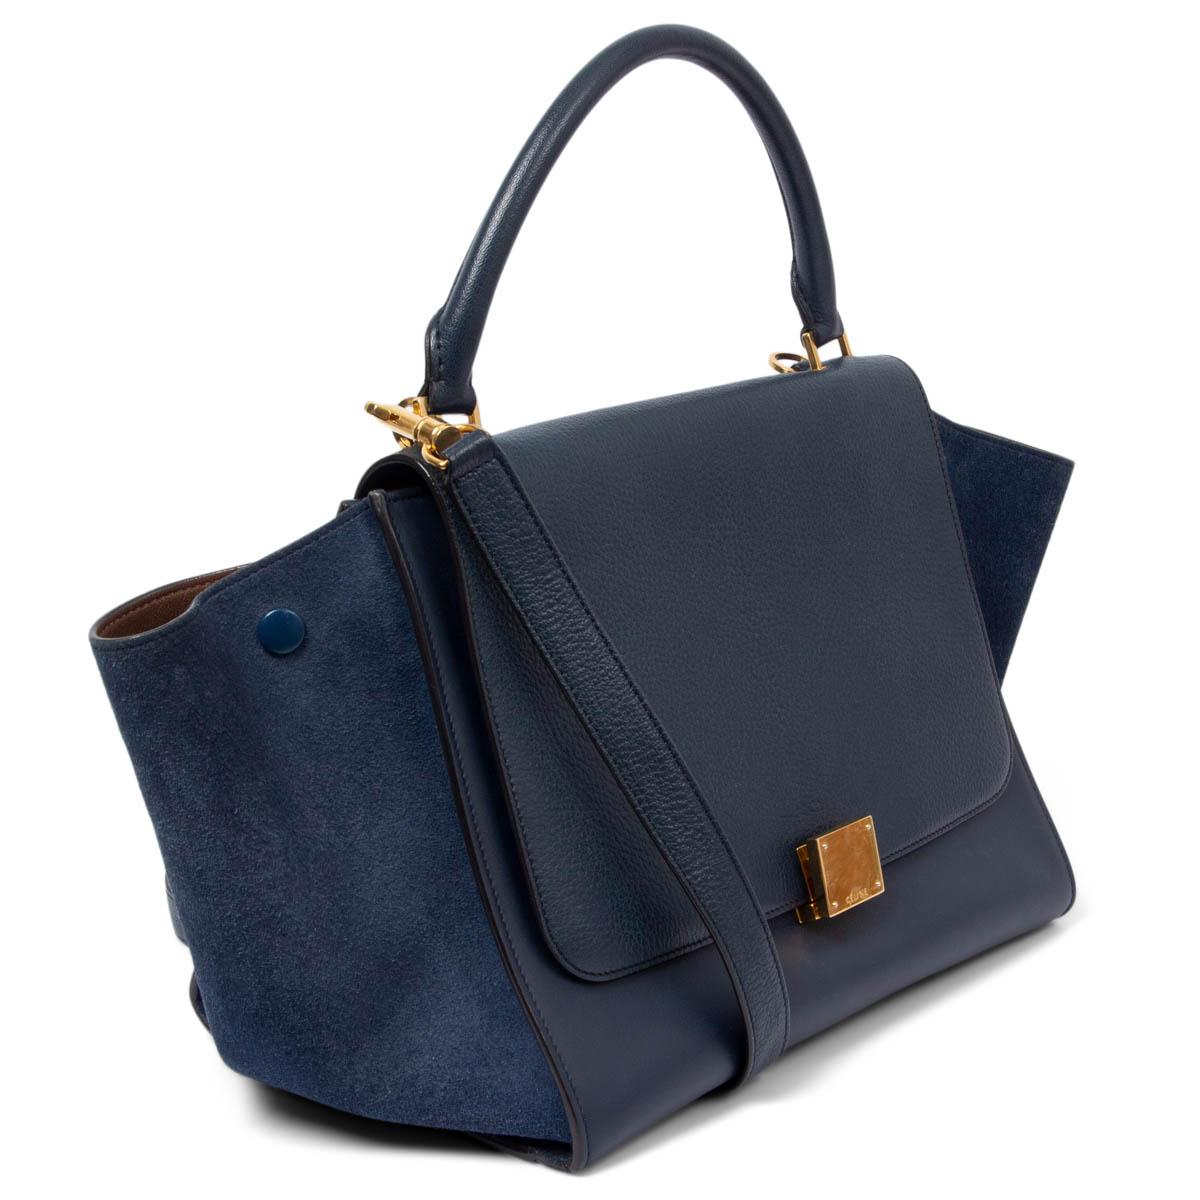 100% authentic Céline Trapeze shoulder bag in navy grained and smooth calfskin and navy suede side parts. One zipper pocket on the back. Opens with zipper on top. Lined in brown lambskin with two slit pocket against the back. Shows some soft wear to